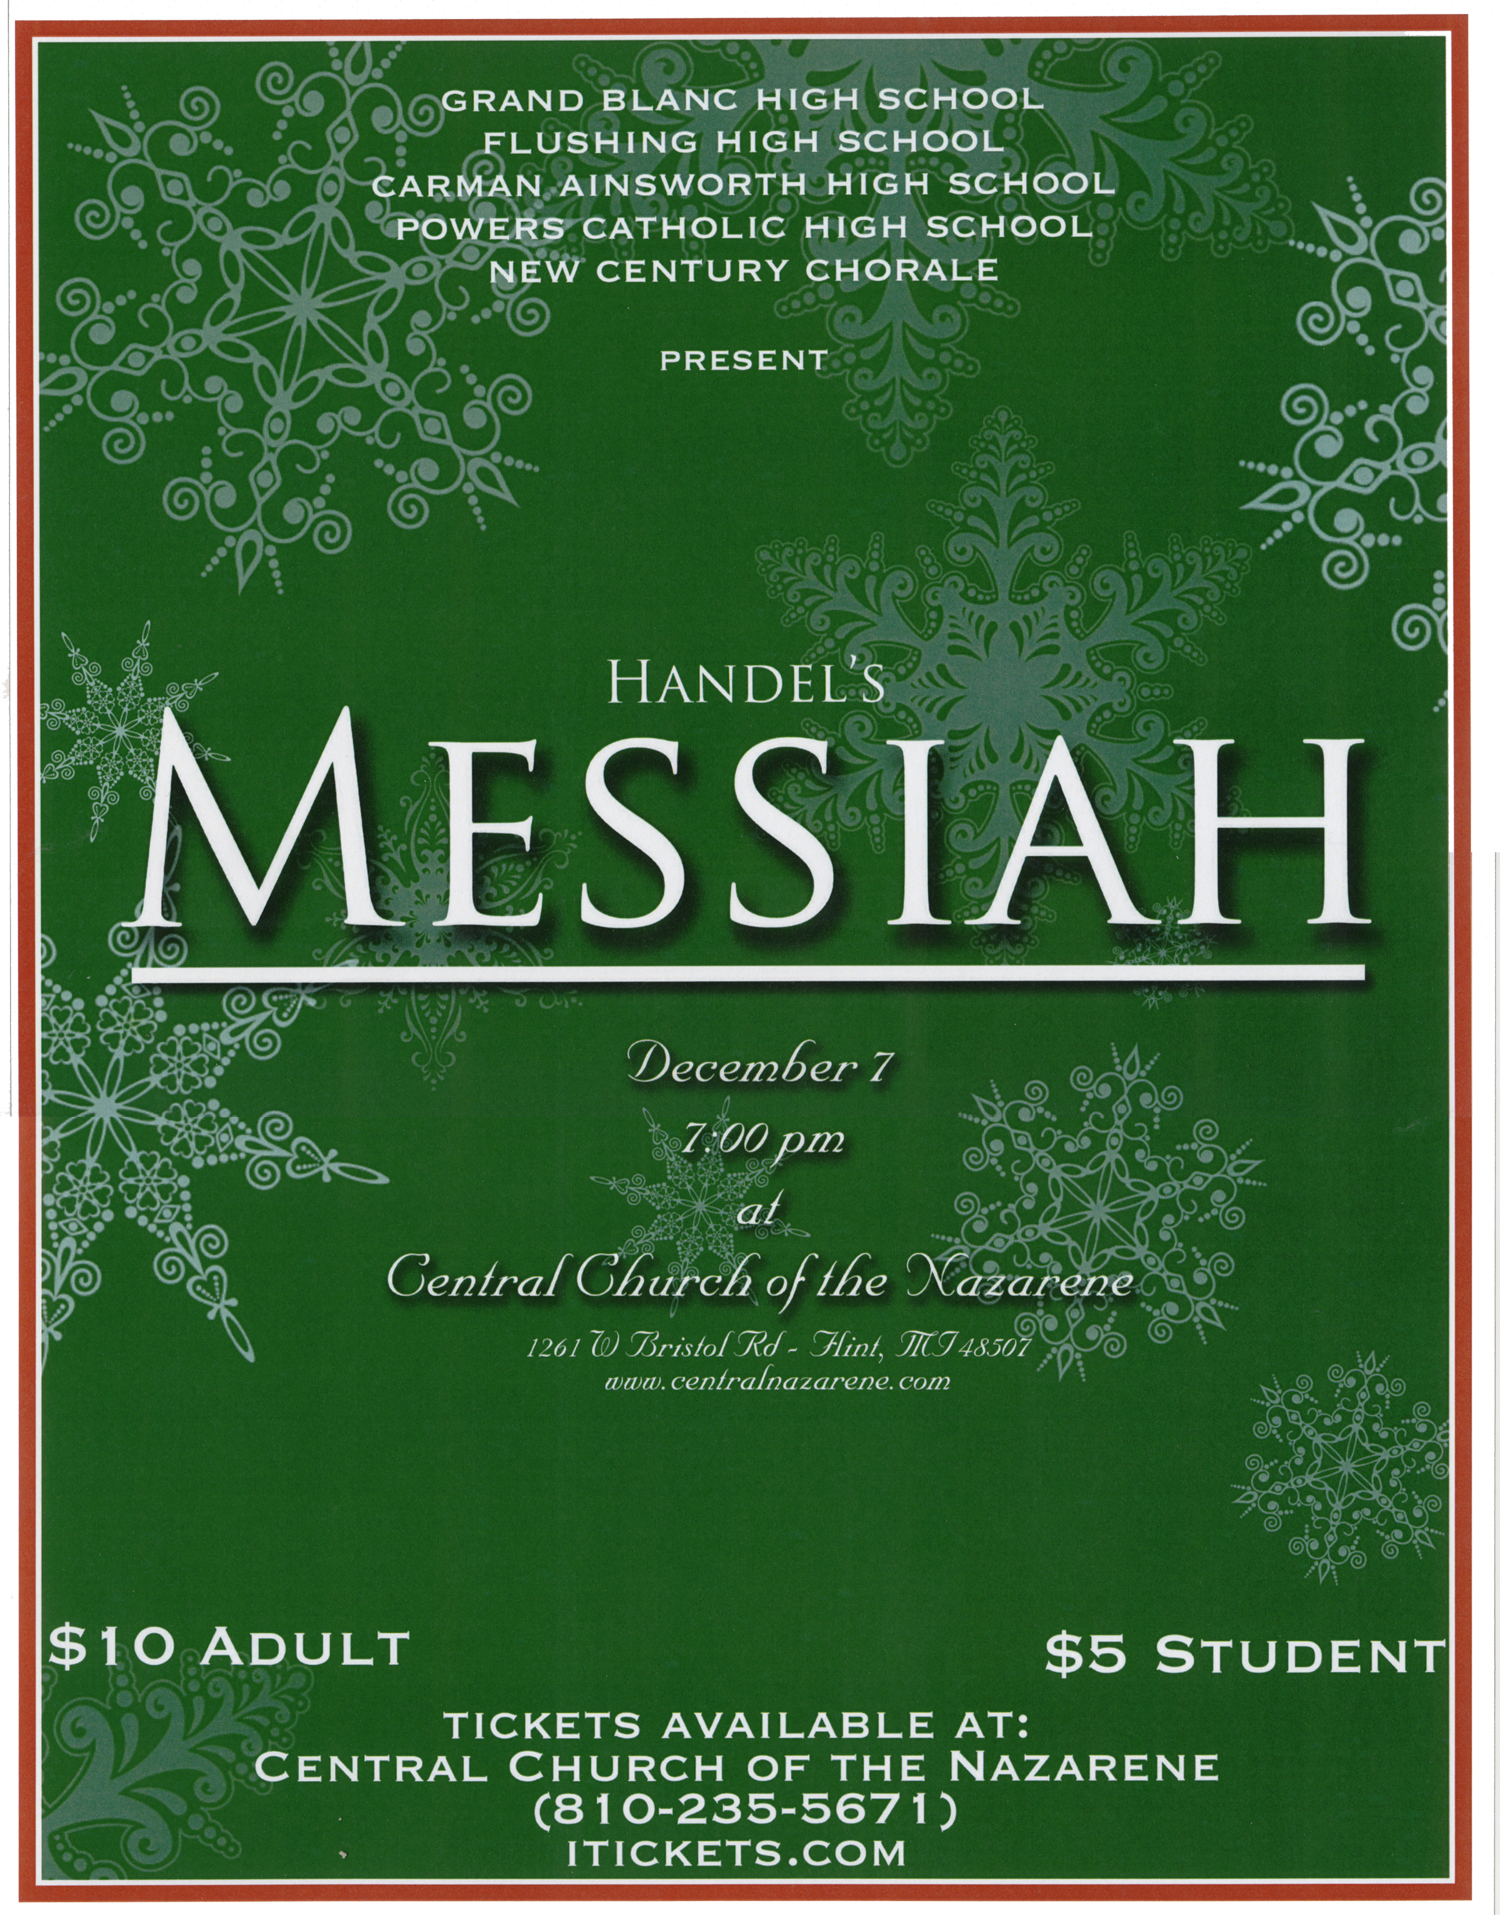 Combined High School Chorale “Messiah” Concert CarmanAinsworth